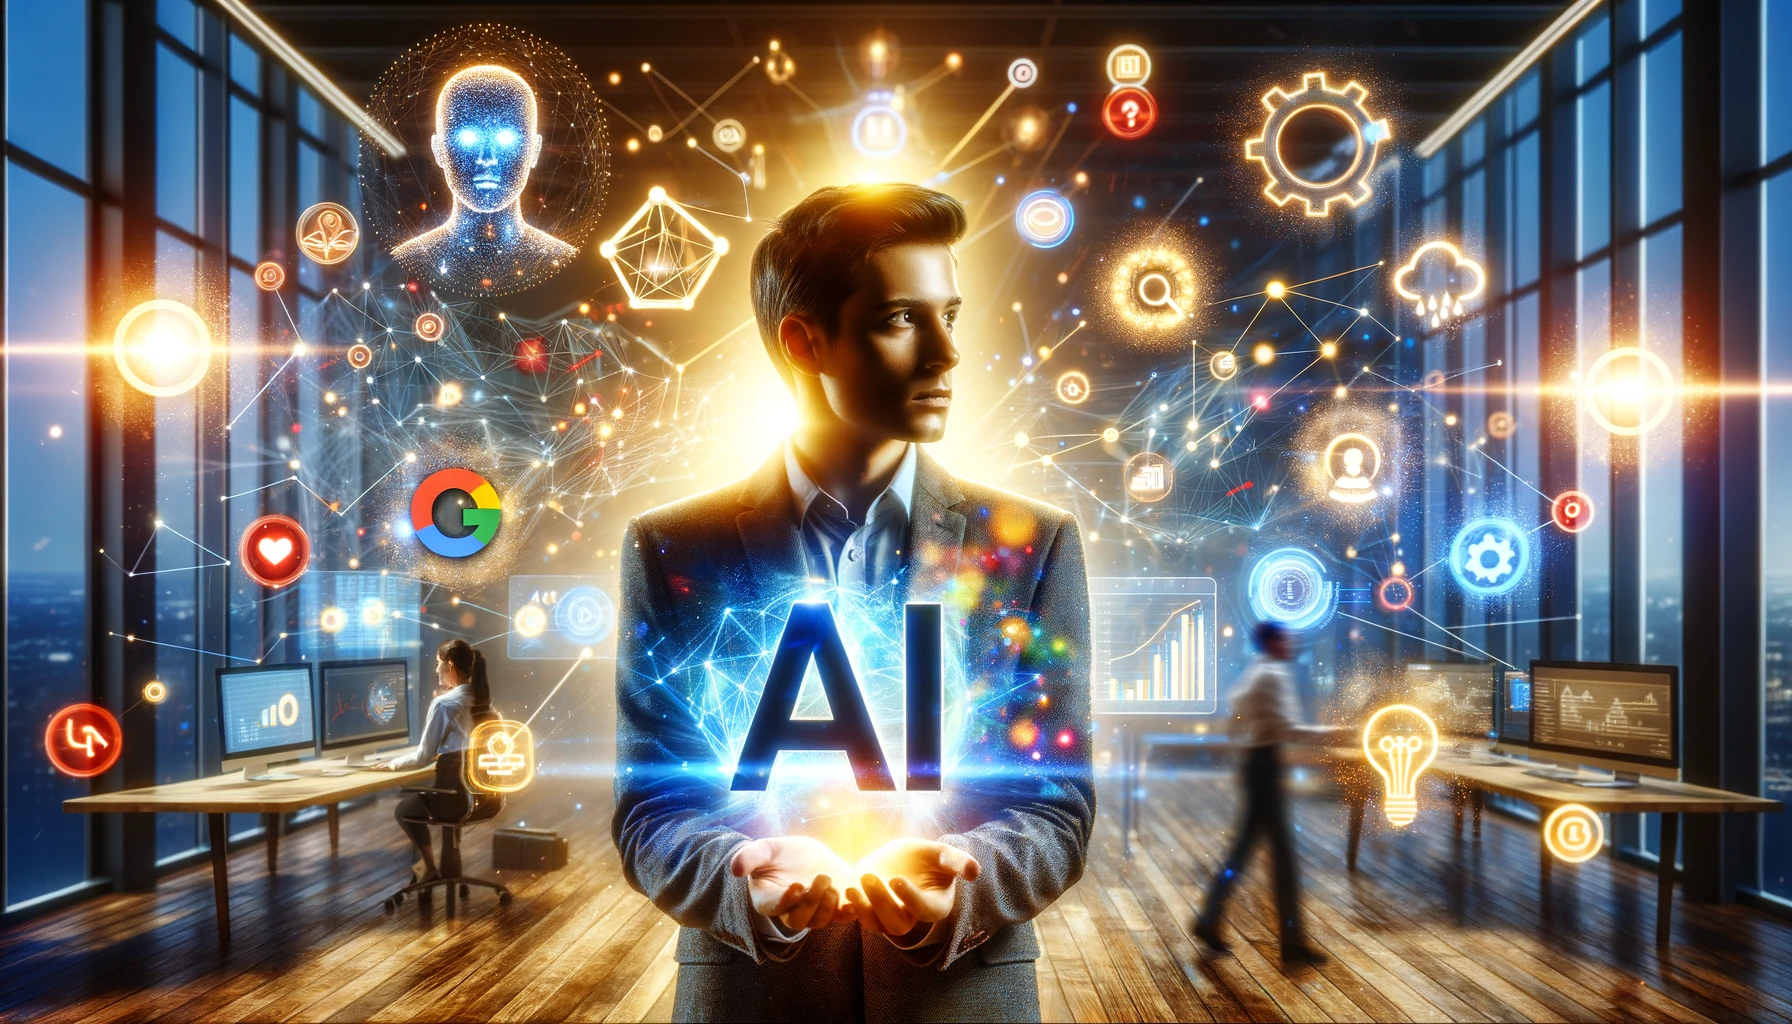 Google's AI Got You Down? Stay Visible with Actionable Tips 